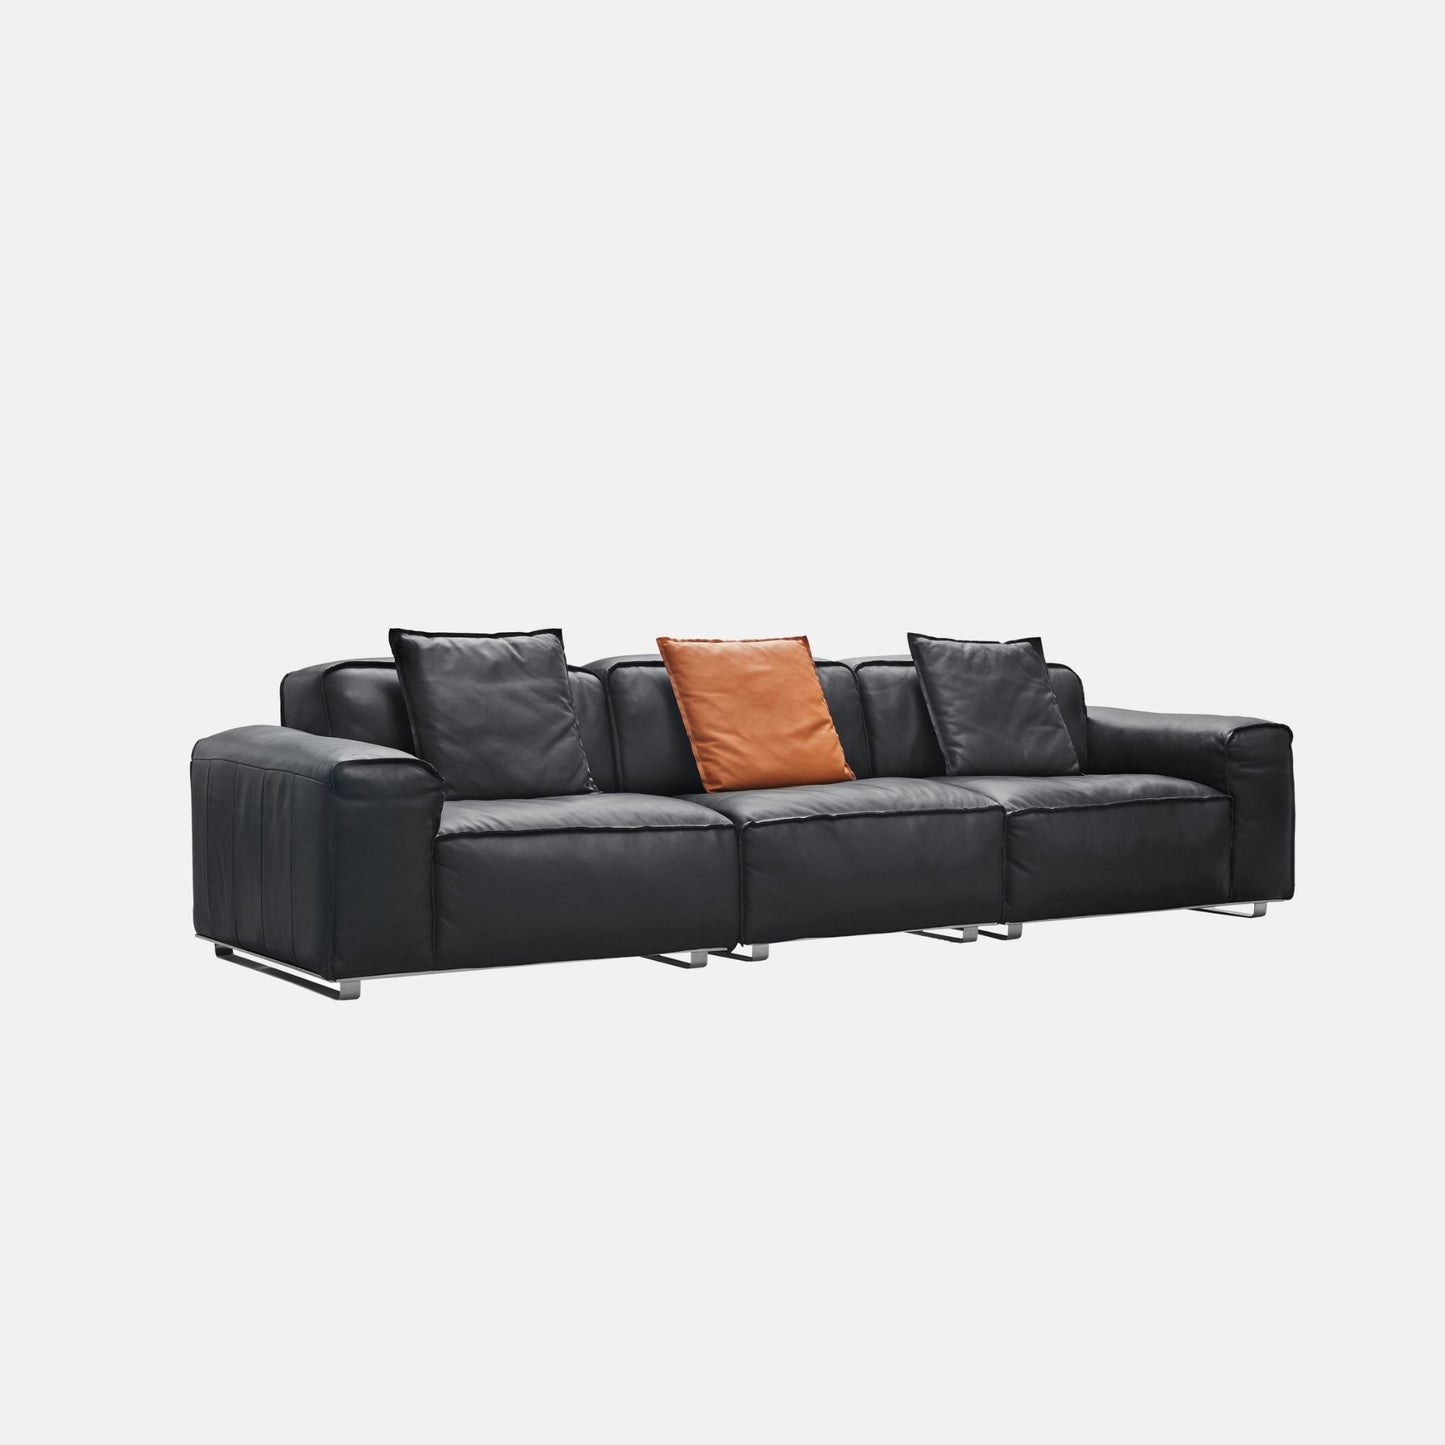 Colby black top grain full leather 3 seat sofa